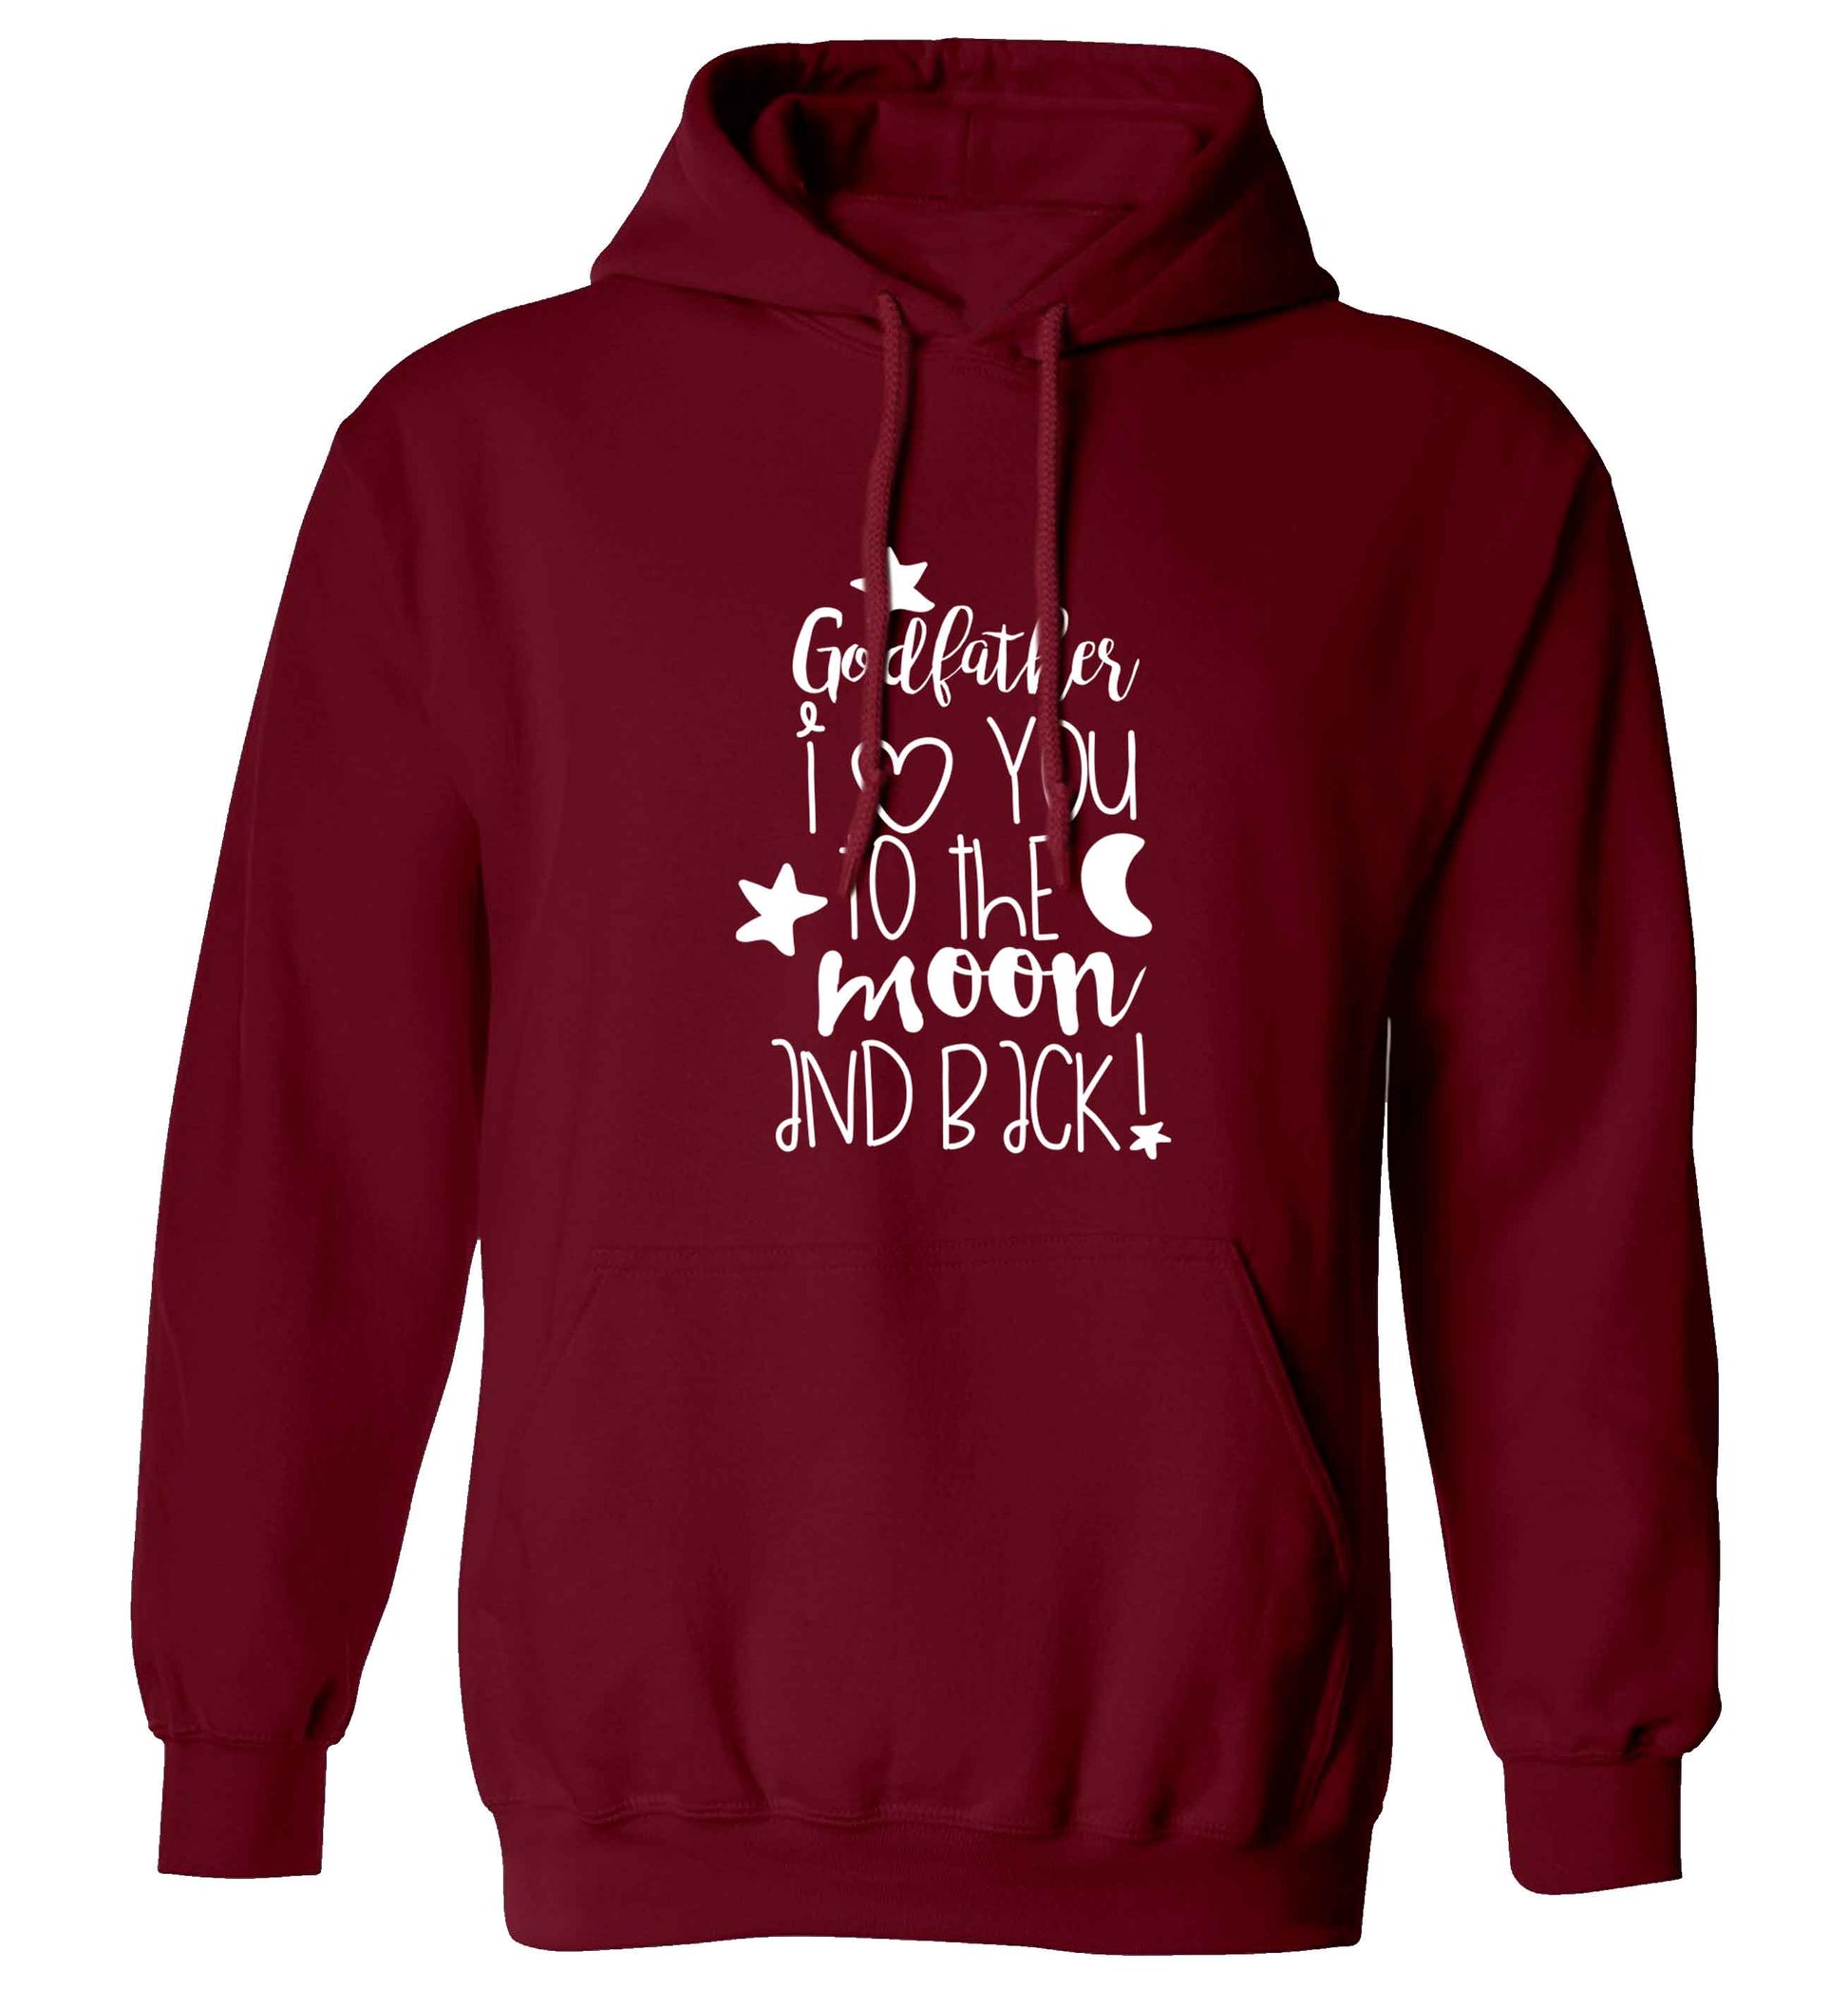 Godfather I love you to the moon and back adults unisex maroon hoodie 2XL